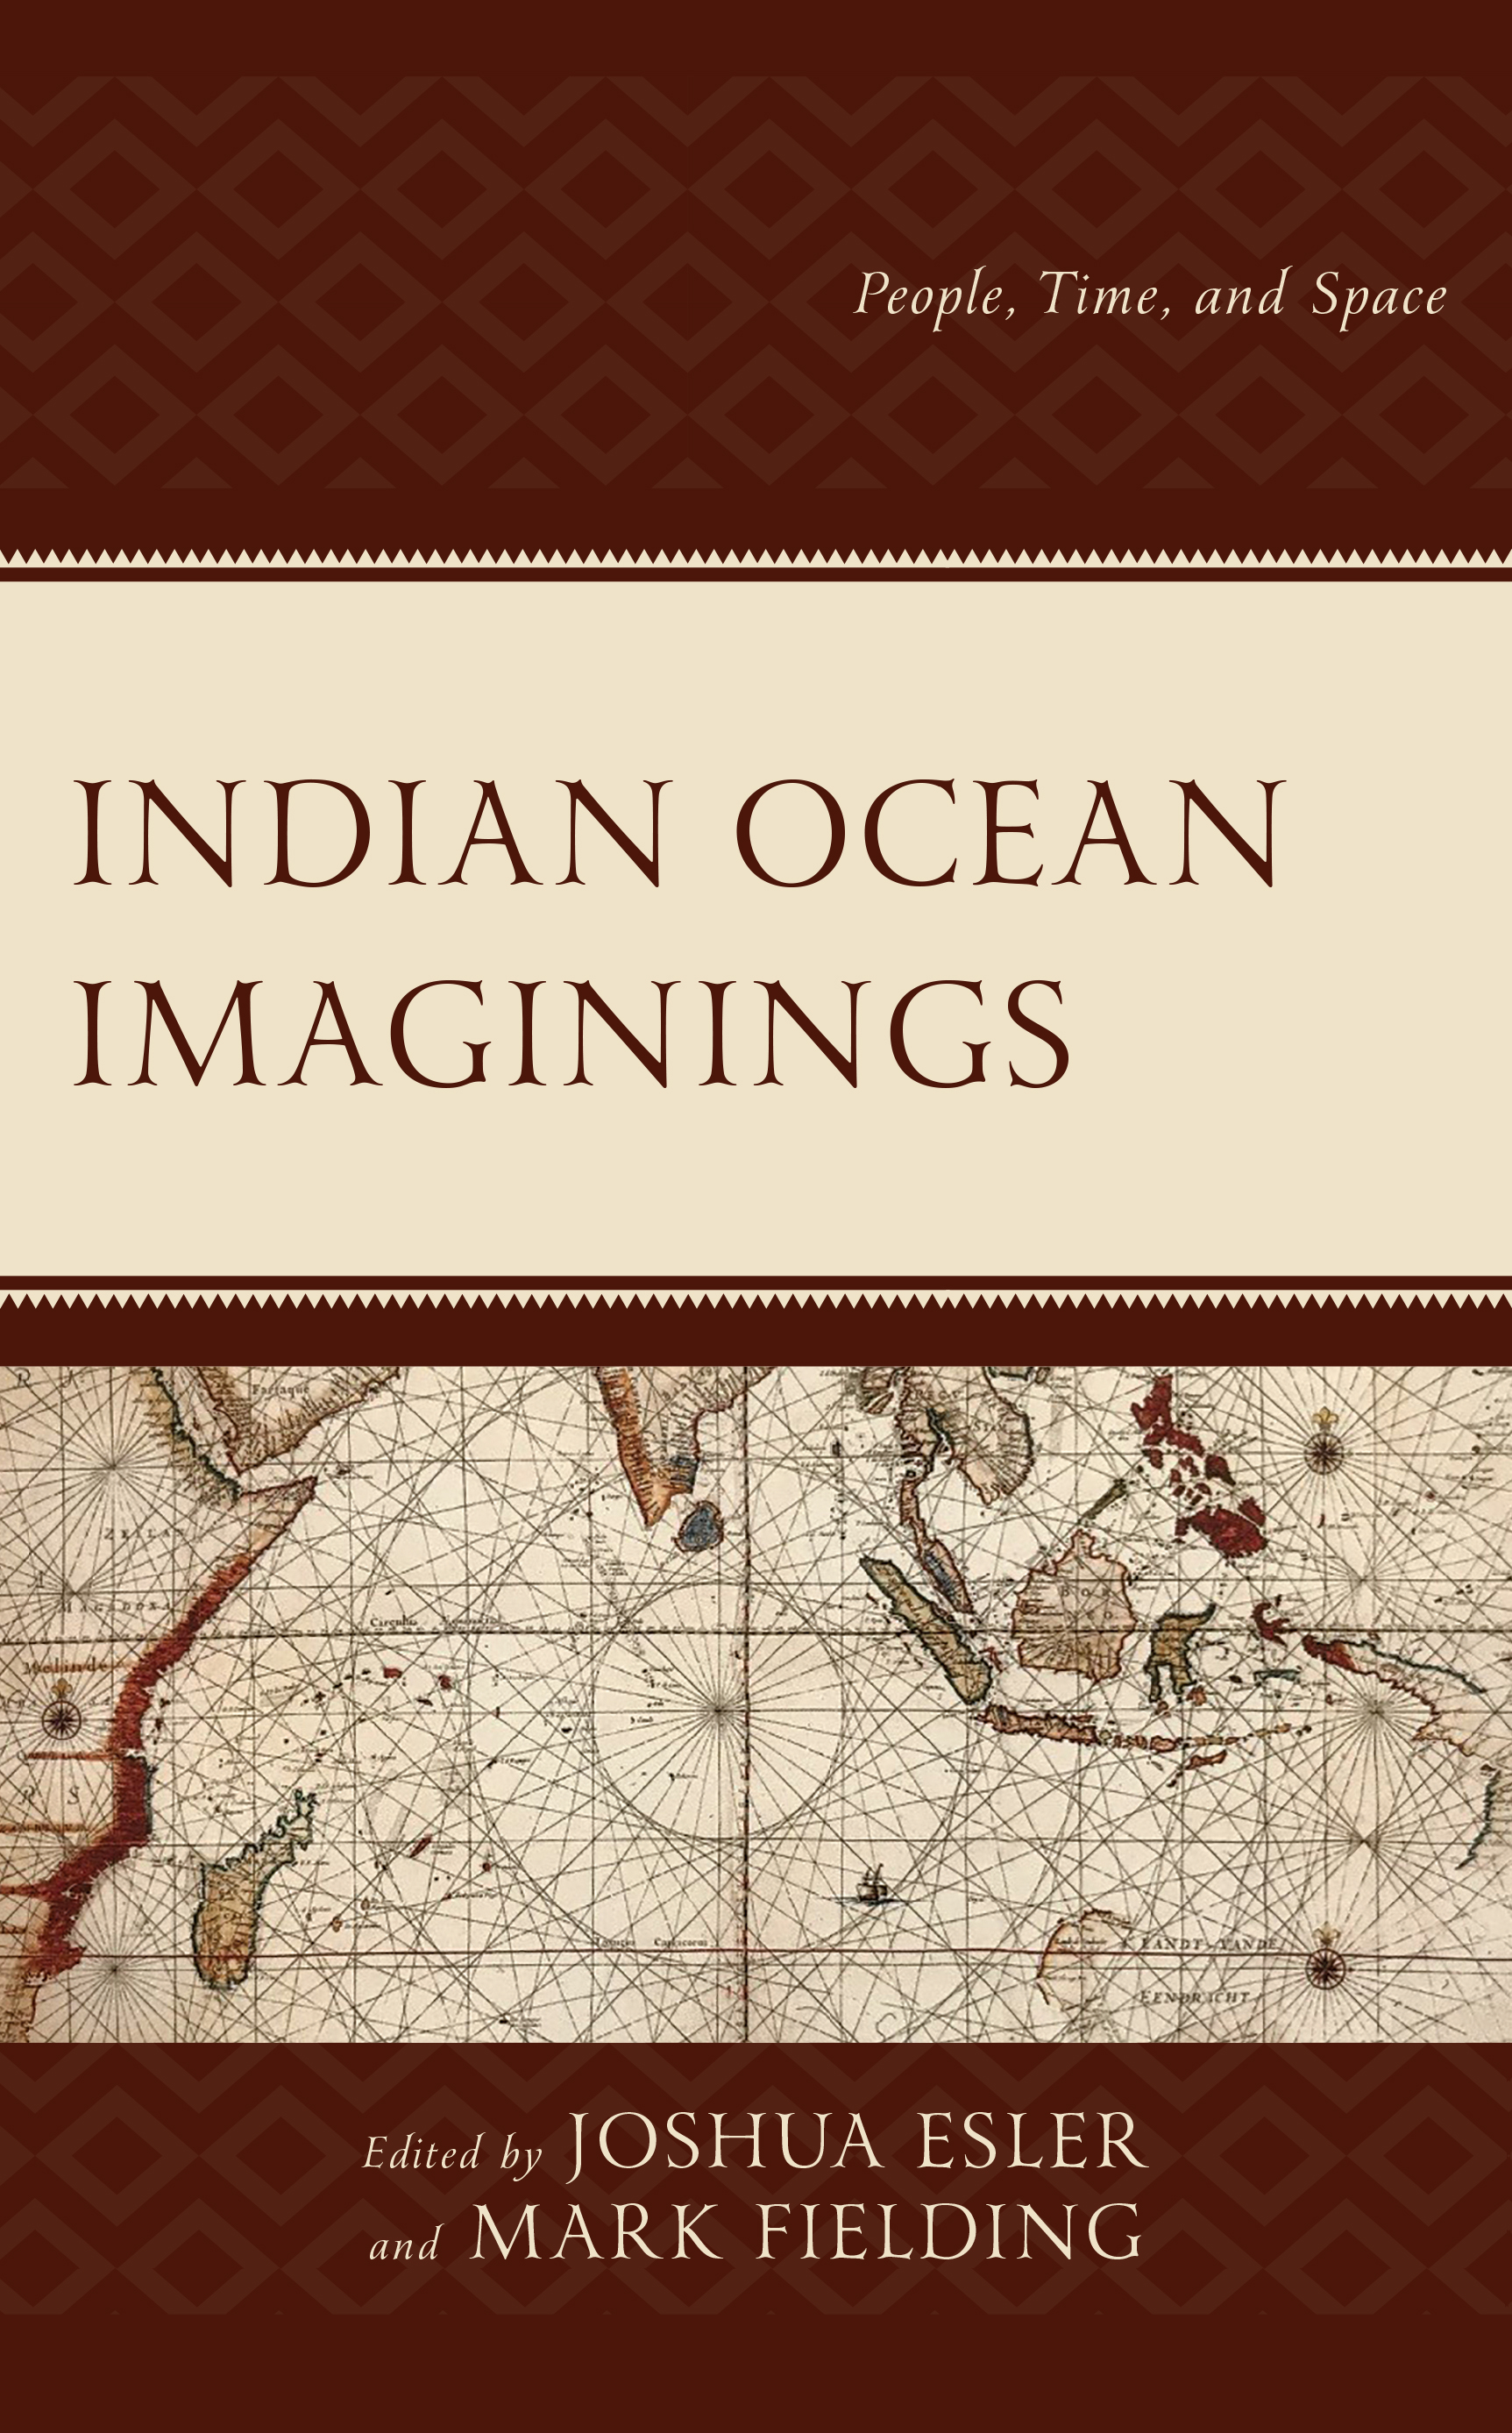 Indian Ocean Imaginings: People, Time, and Space